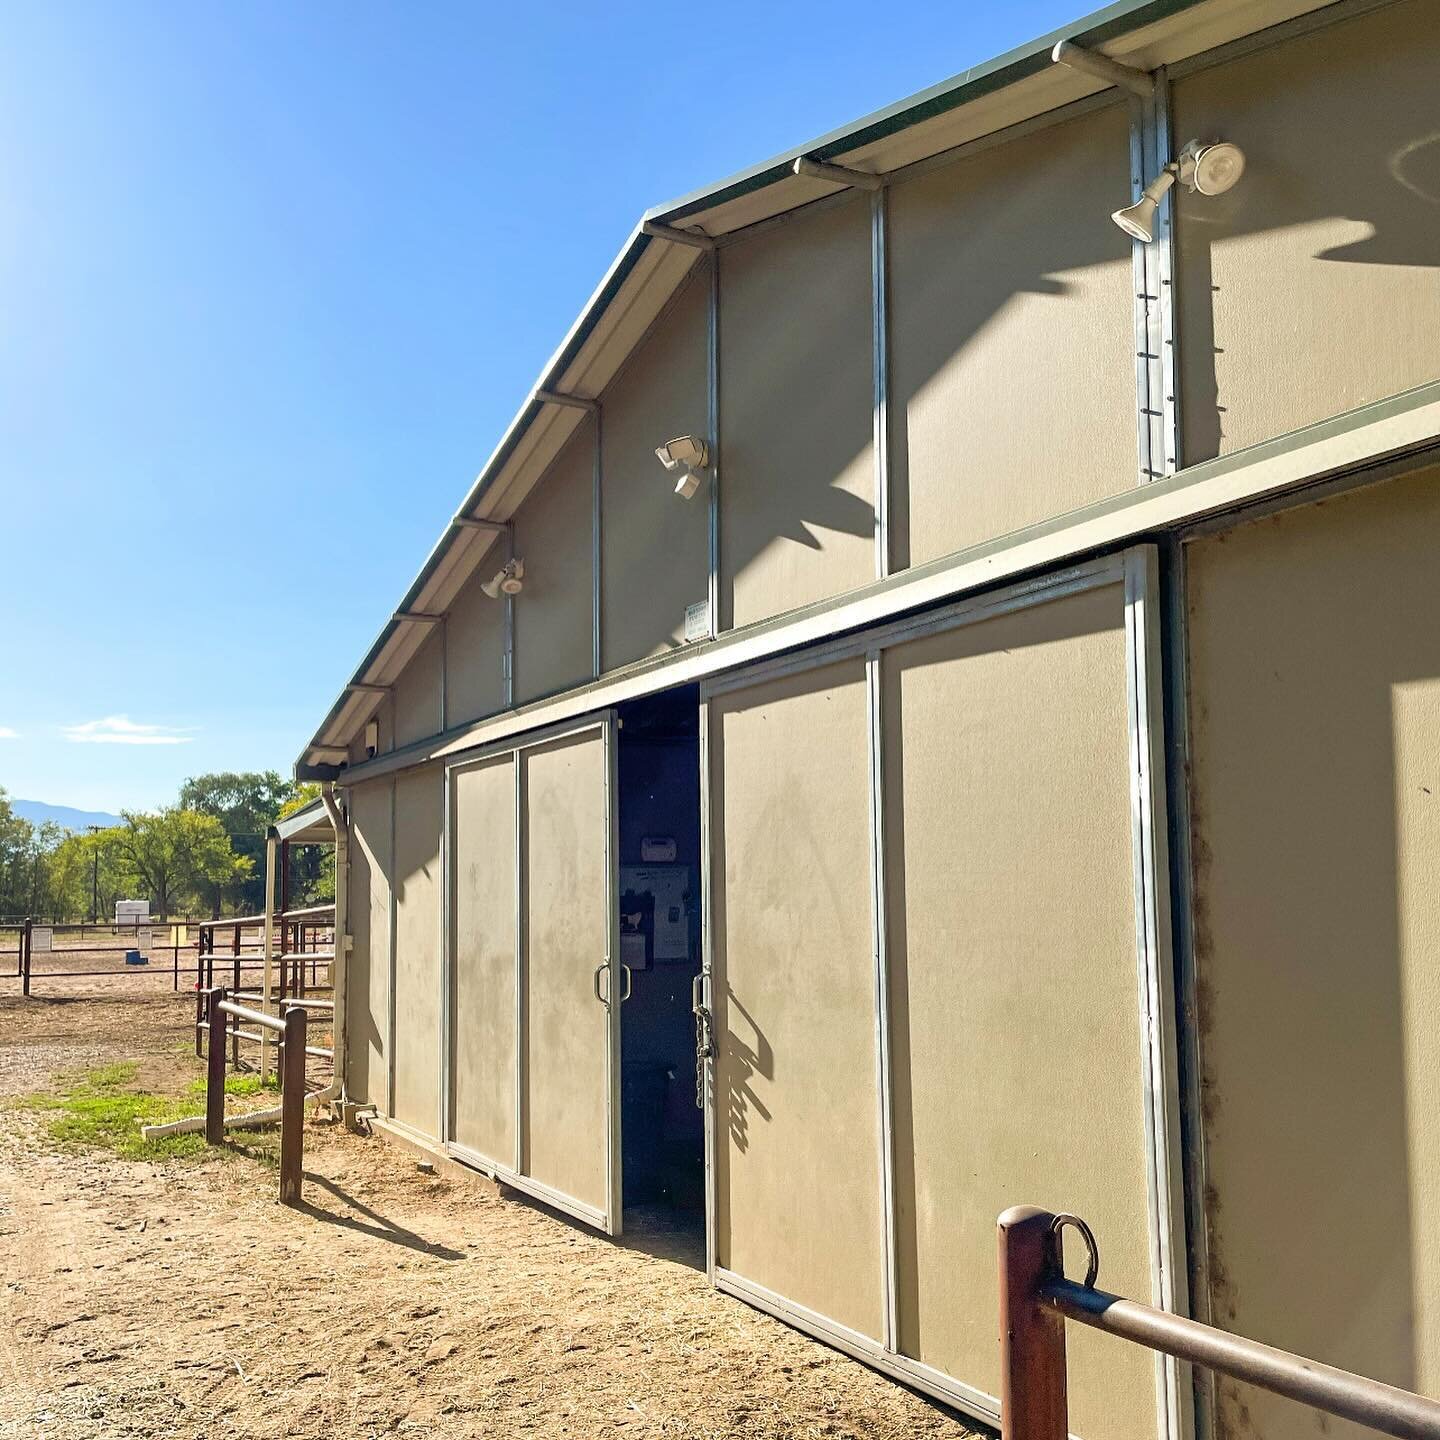 Hunter Jumpers can find great amenities and even the occasional hot air balloon sighting at this stable in the heart of New Mexico. 
🏠: Triple G Equestrian
📍: Corrales, New Mexico